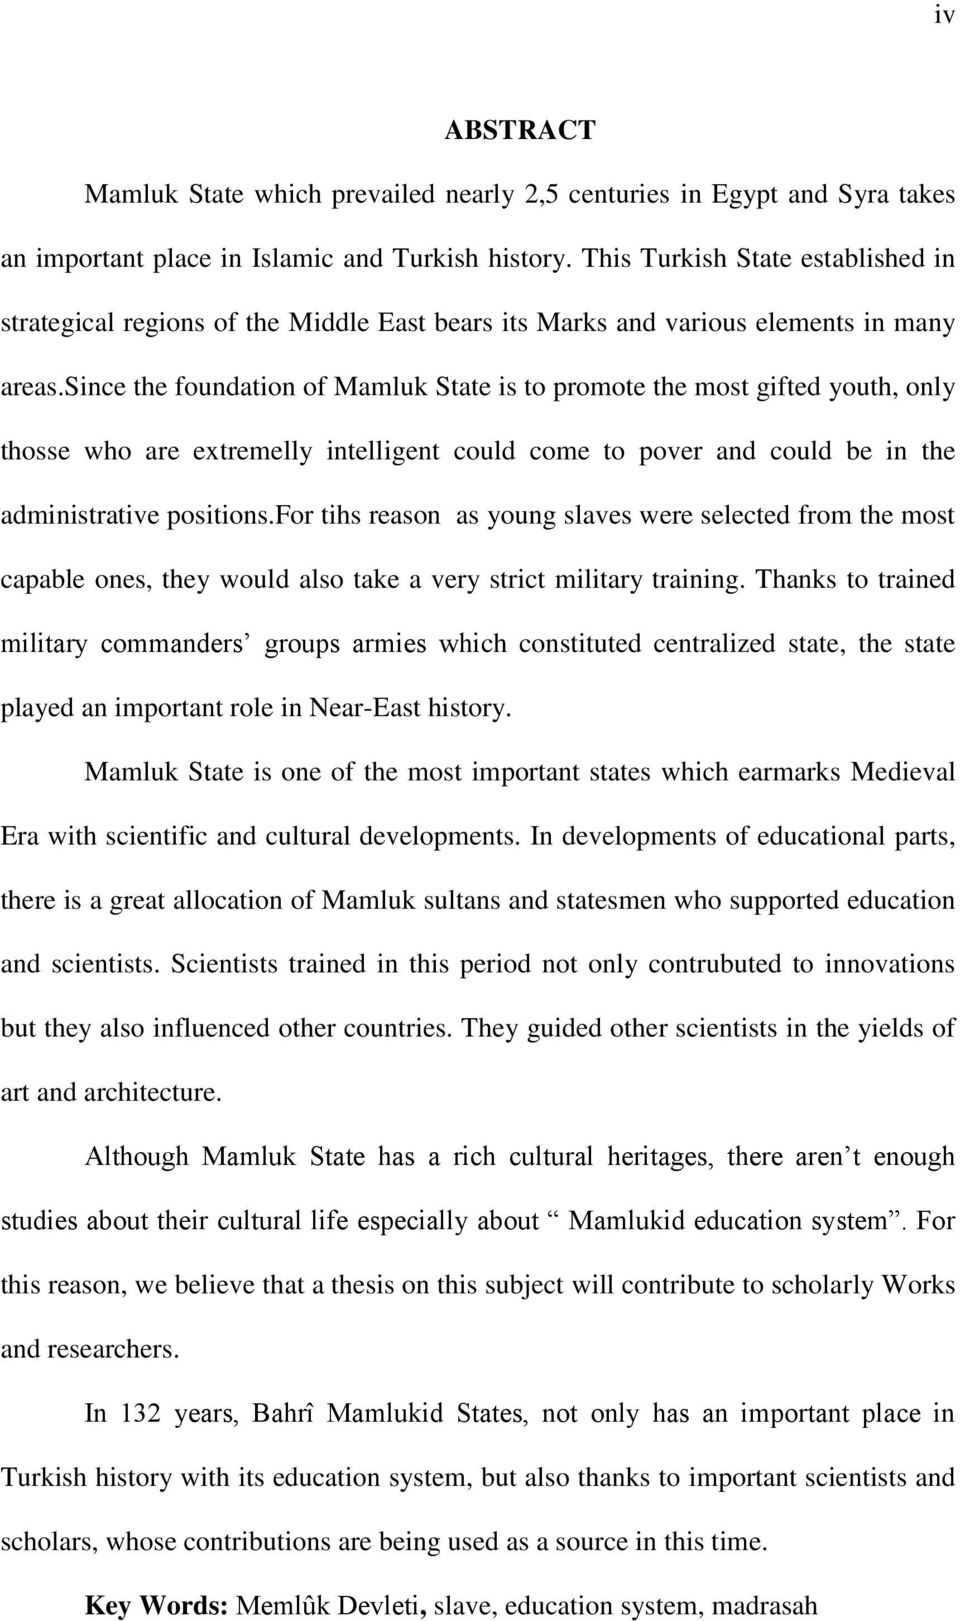 since the foundation of Mamluk State is to promote the most gifted youth, only thosse who are extremelly intelligent could come to pover and could be in the administrative positions.